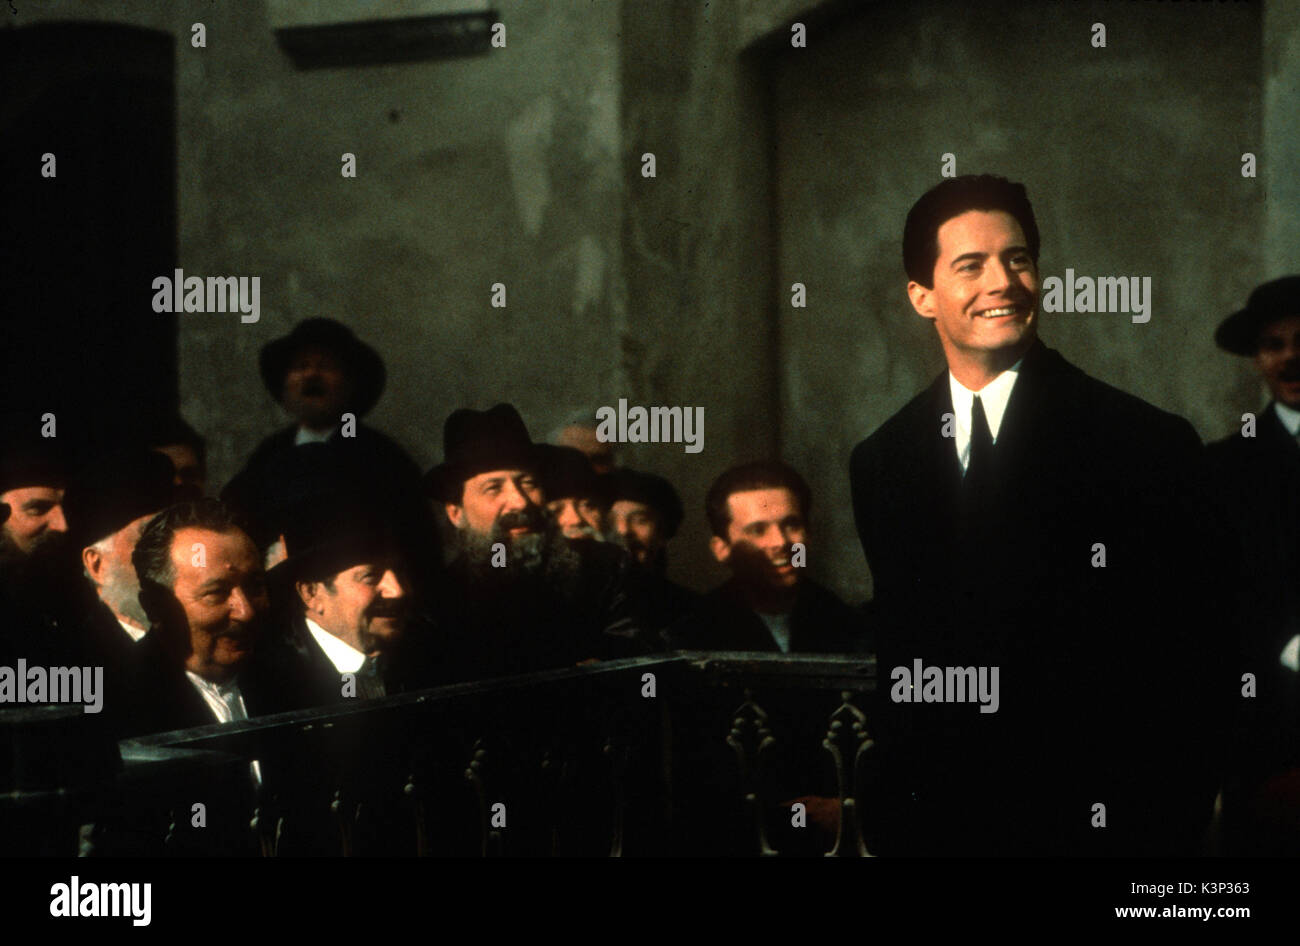 THE TRIAL [BR 1993] KYLE MACLACHLAN as Josef K     Date: 1993 Stock Photo